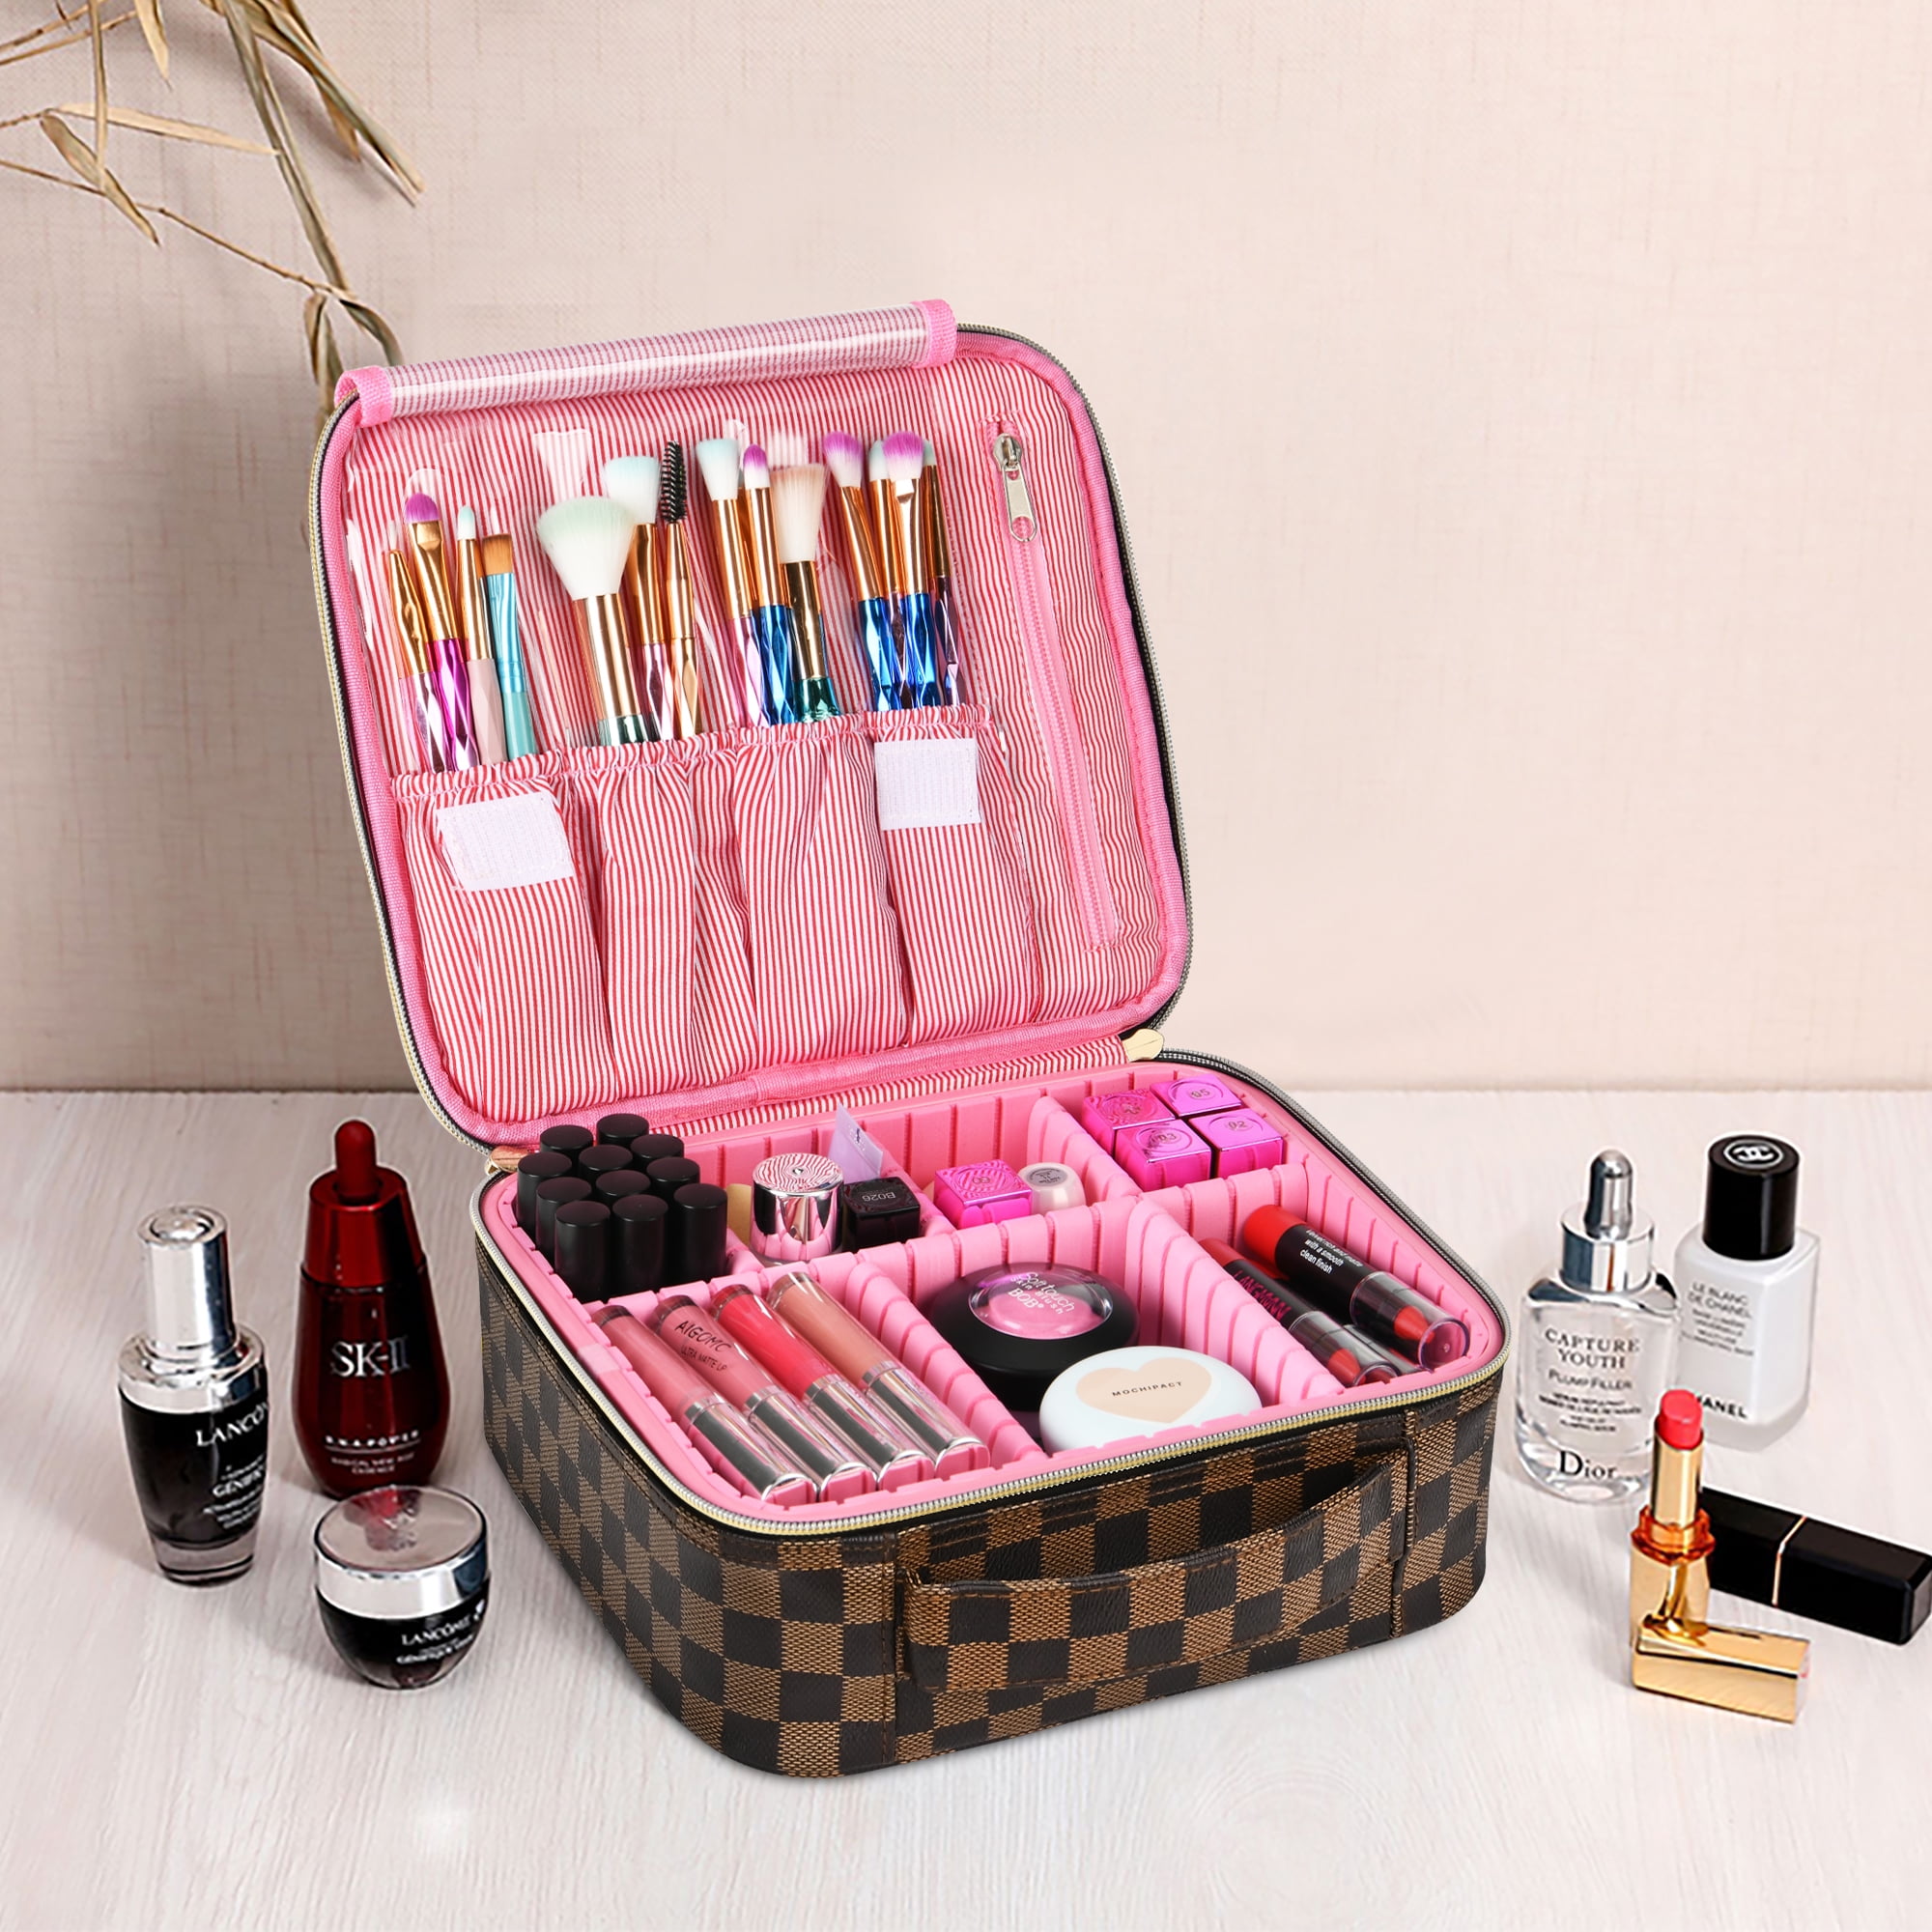  Makeup Bag Excellent Multifunctional Checkerboard Girl Fashion  Makeup Bag Pink : Beauty & Personal Care